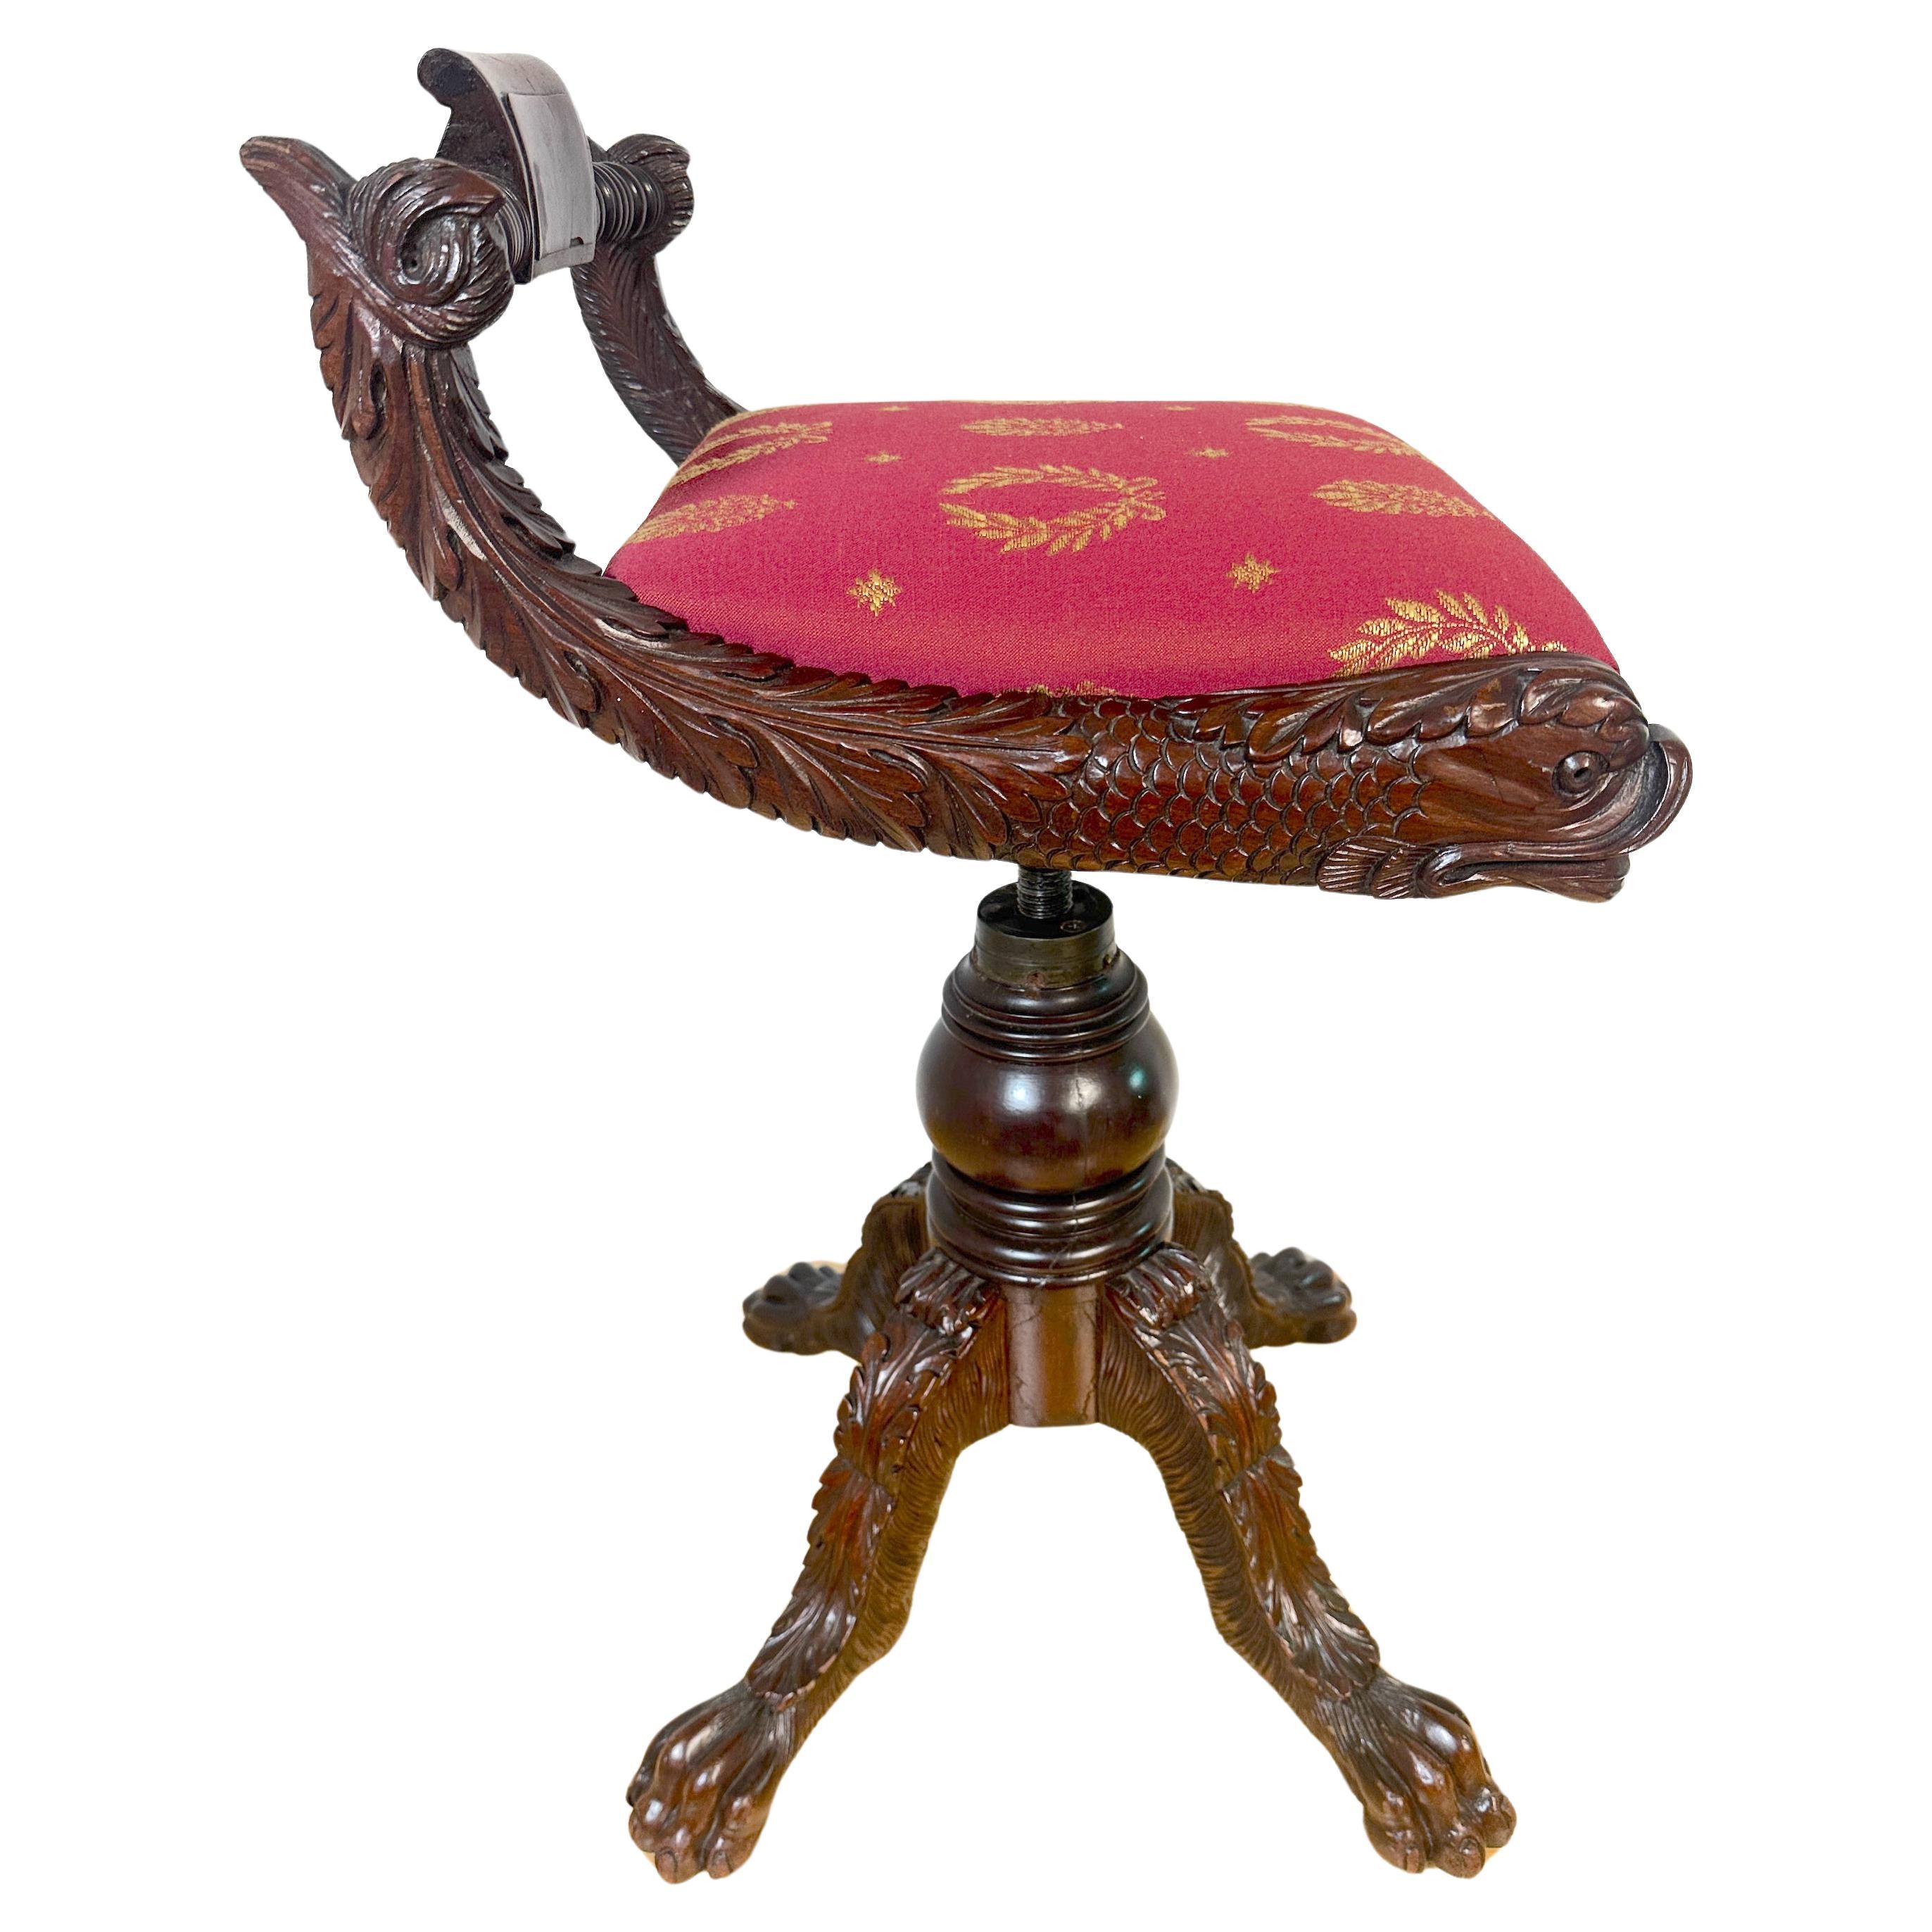 Classical Carved Hardwood Piano Stool with Dolphins, New York, circa 1825

A truly exceptional classical carved hardwood piano stool with dolphins, originating from New York circa 1825. This piece stands as a testament to the rare and exquisite